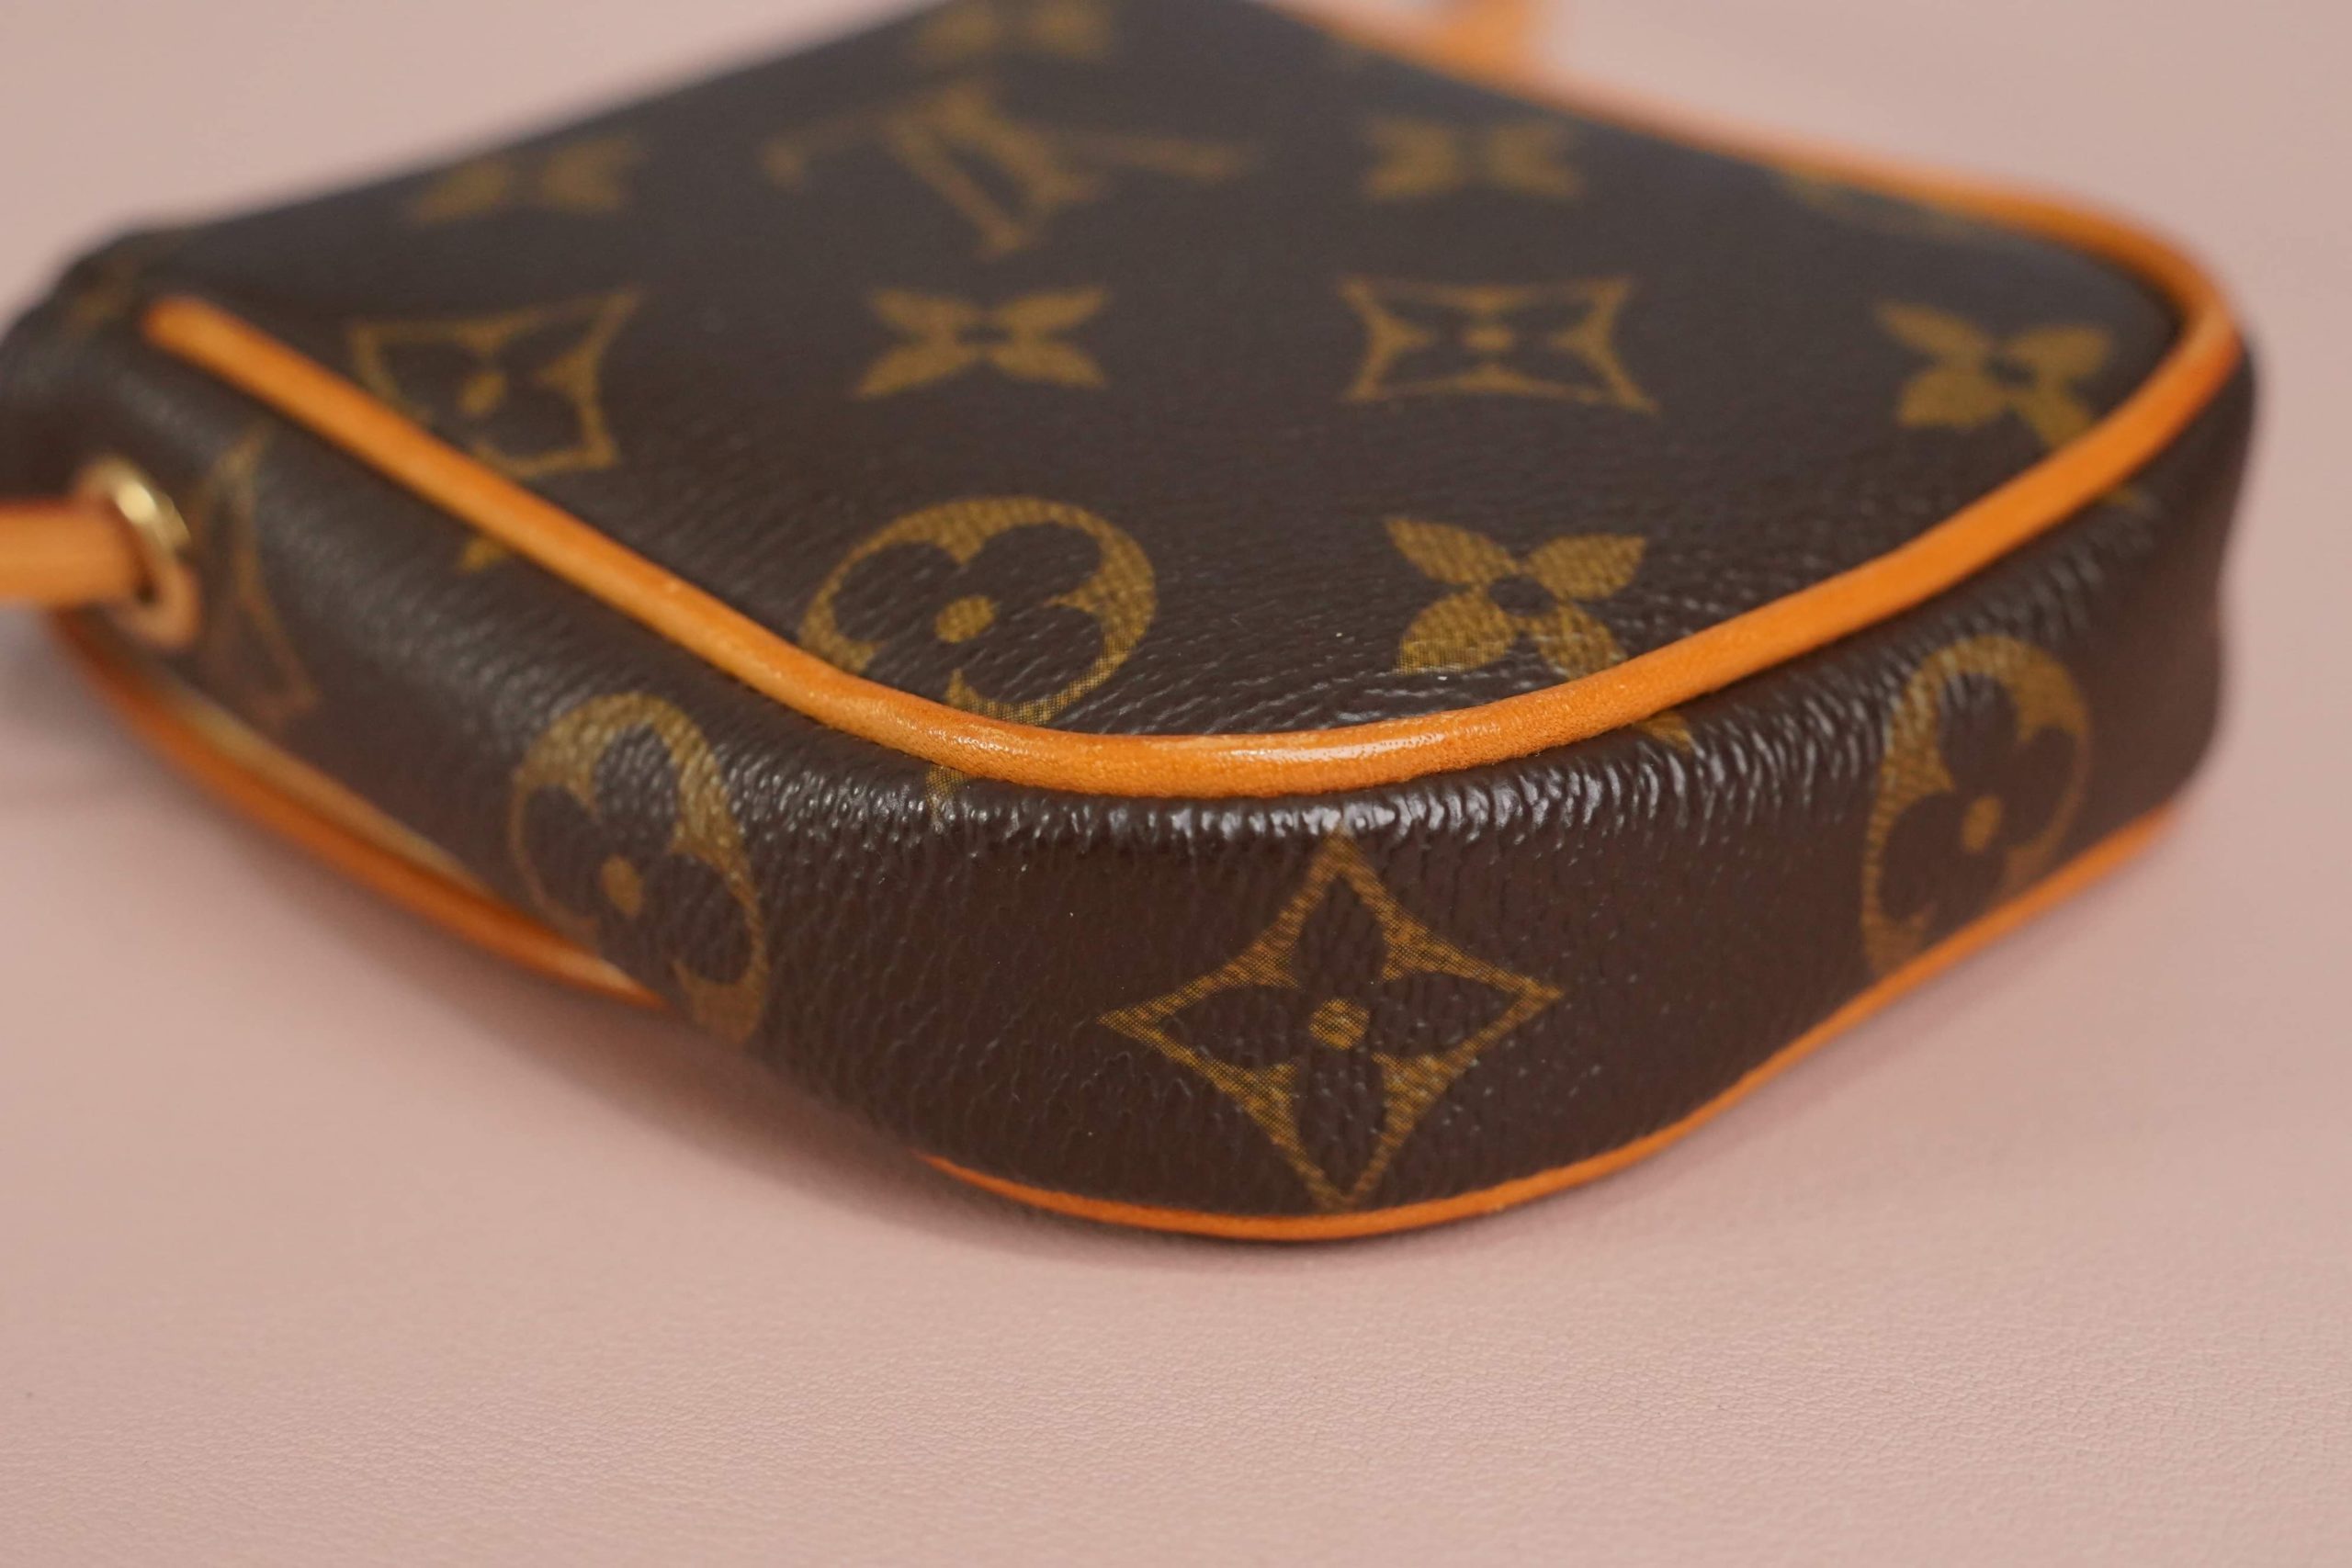 Different patina on two new Pochette Accessoires : r/Louisvuitton